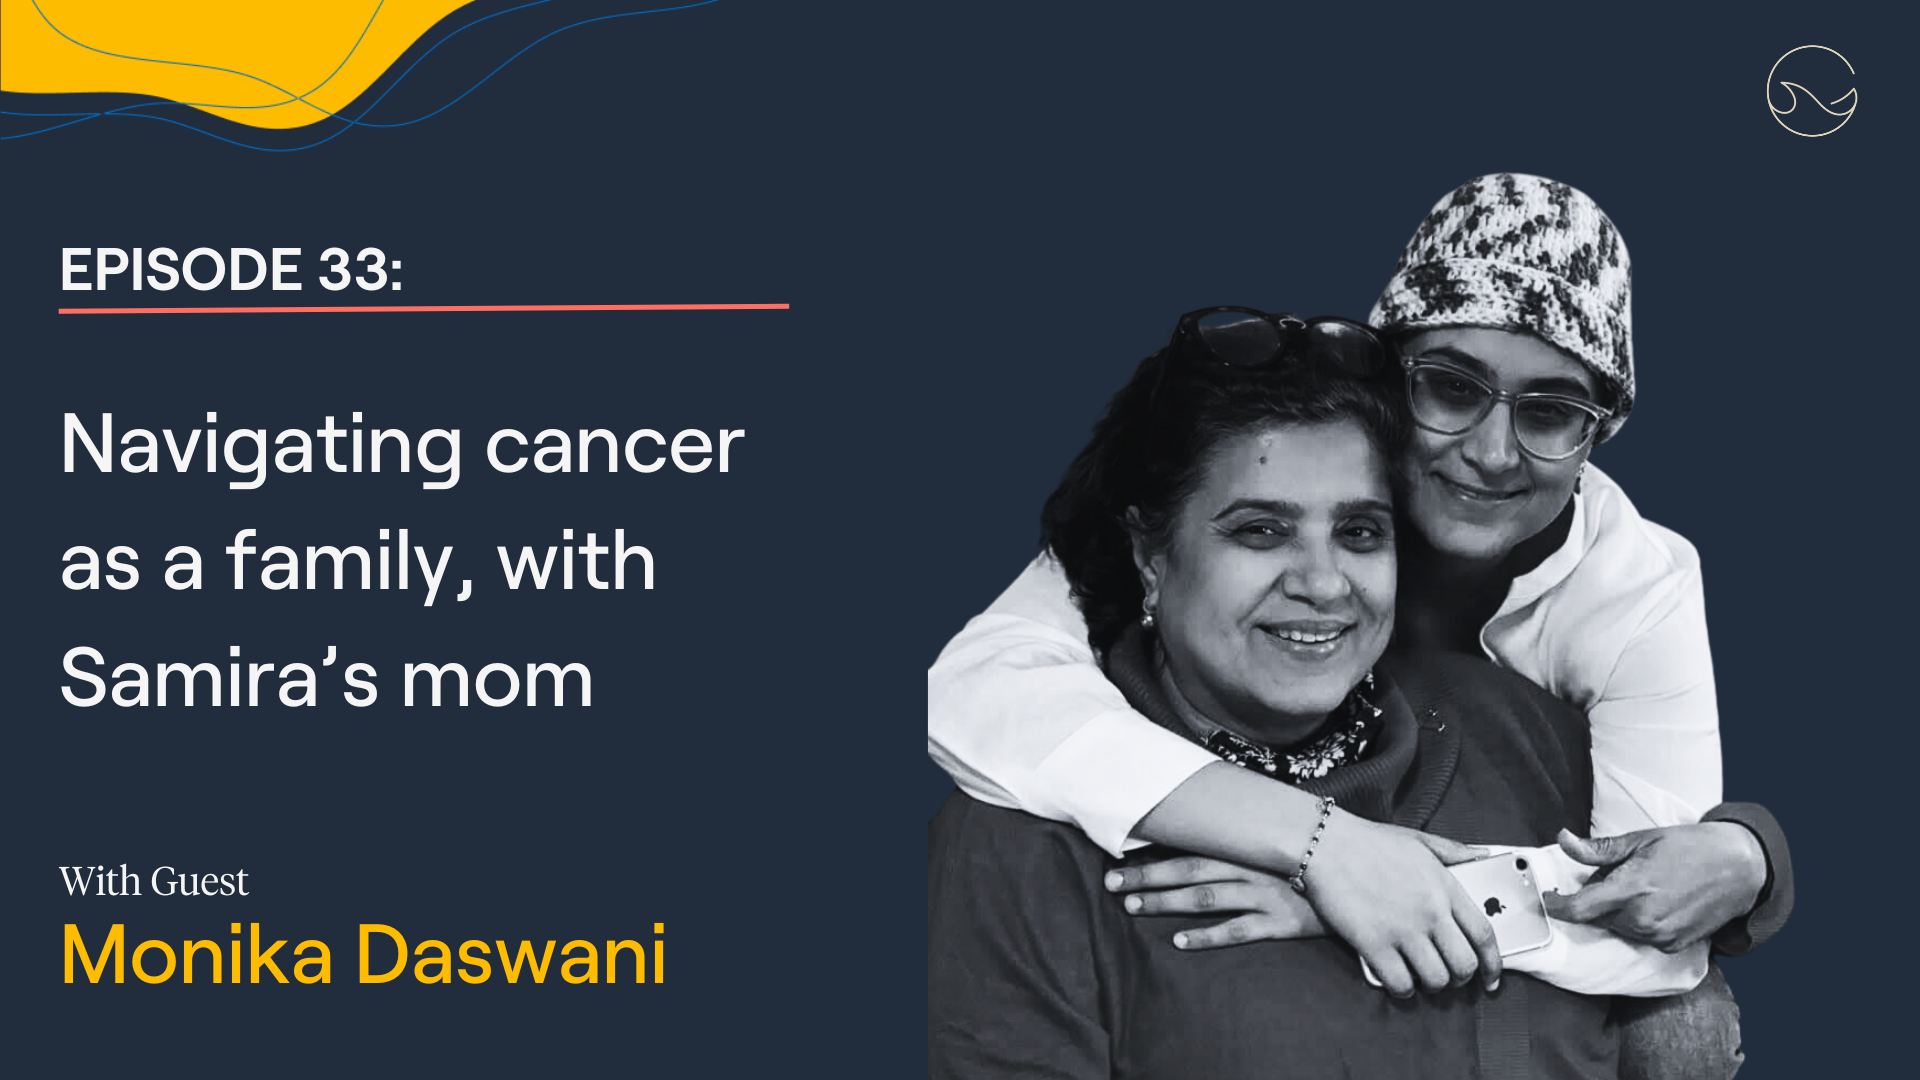 Load video: Samira&#39;s mom Monika Daswani, CEO of Helping Hands Foundations, talks about being a caregiver during Samira&#39;s cancer treatment.